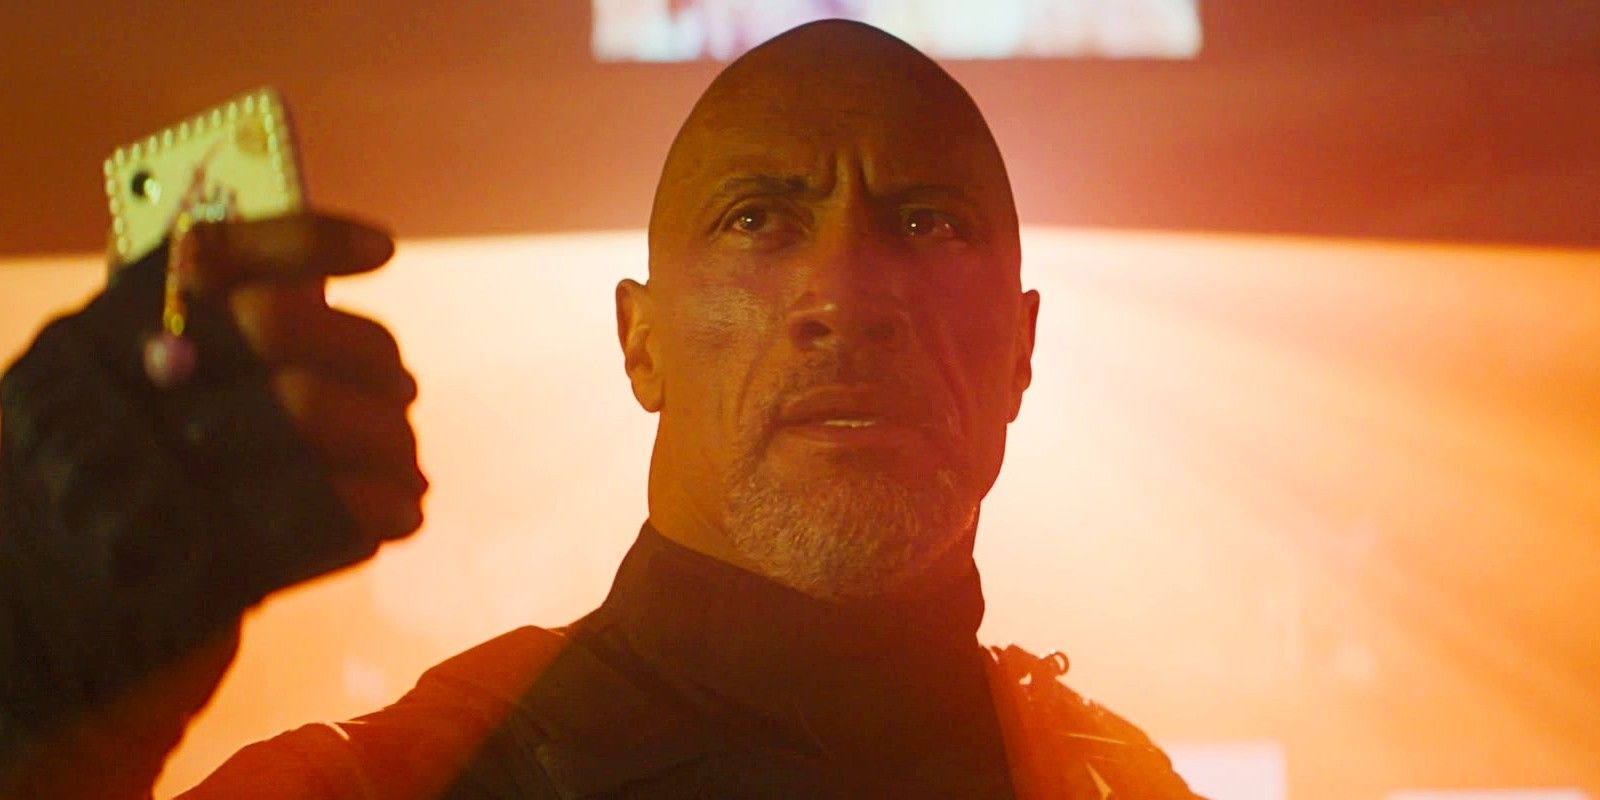 Dwayne Johnson as Hobbs looking angry in Fast X